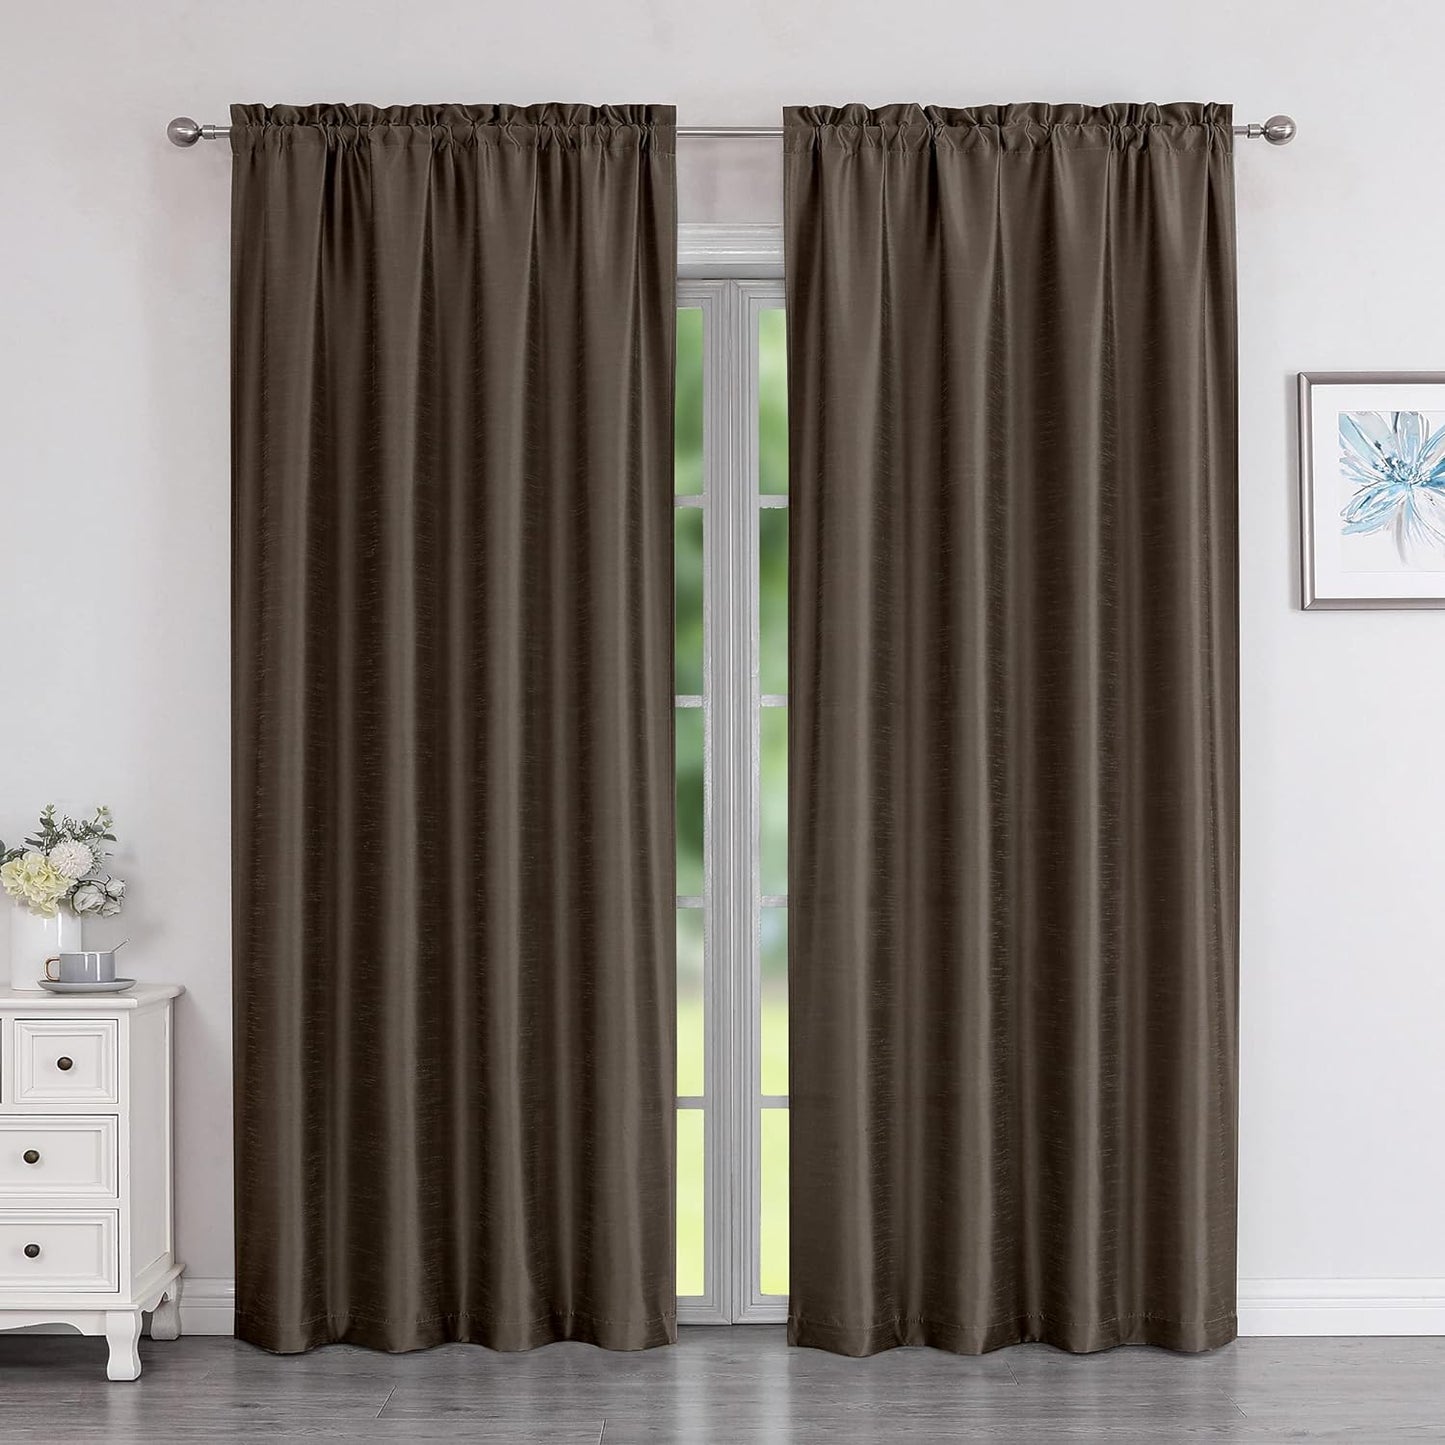 Chyhomenyc Uptown Sage Green Kitchen Curtains 45 Inch Length 2 Panels, Room Darkening Faux Silk Chic Fabric Short Window Curtains for Bedroom Living Room, Each 30Wx45L  Chyhomenyc Chocolate 2X40"Wx84"L 